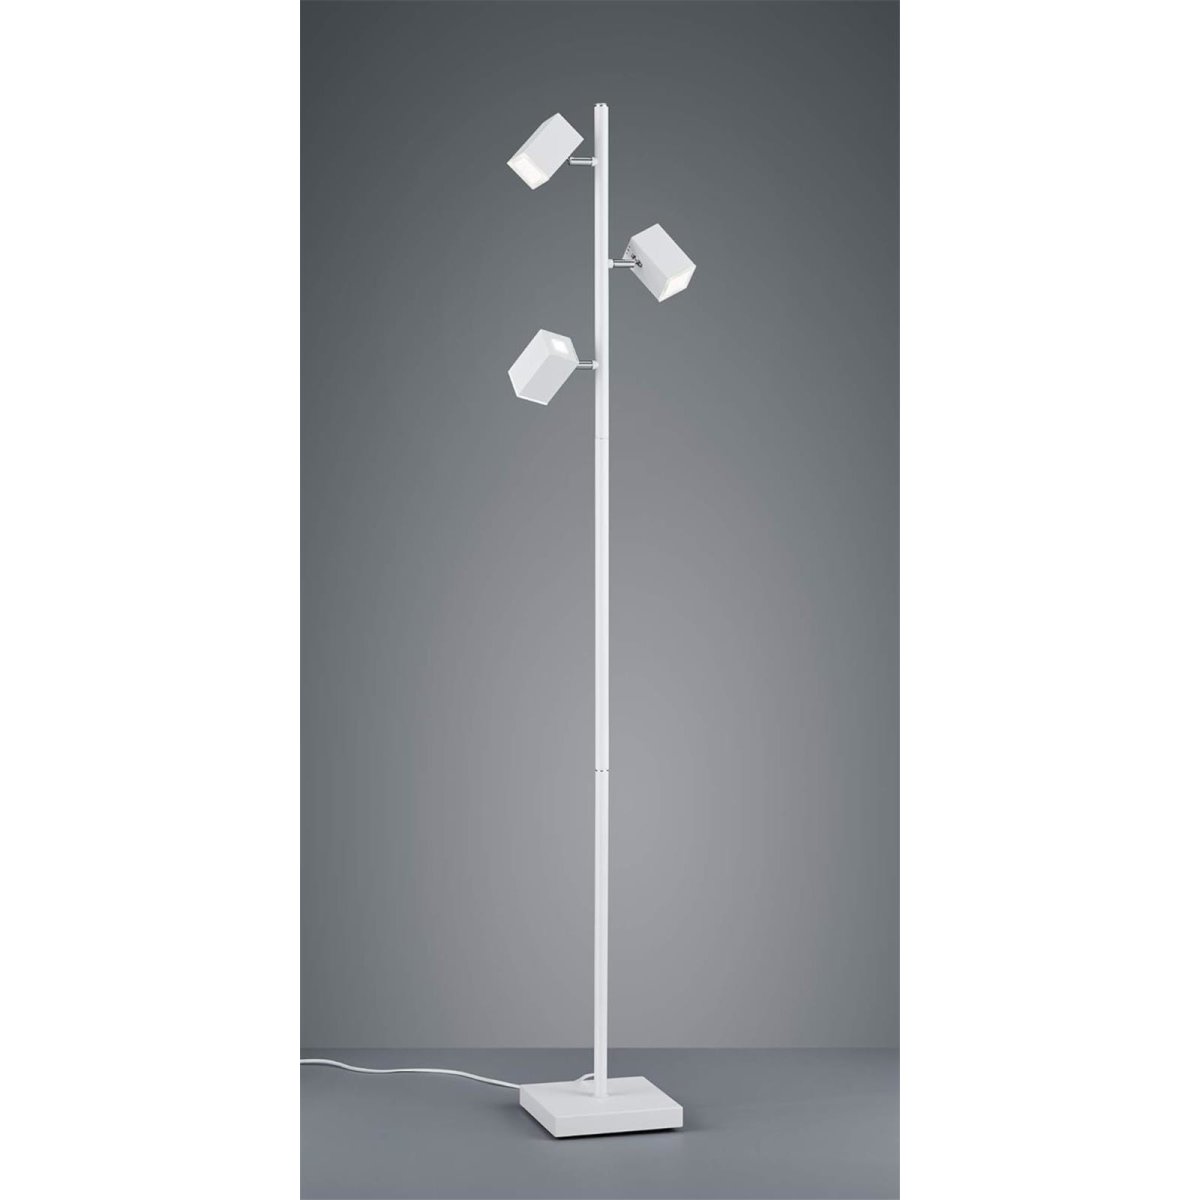 14,1W 3-flammig Spots LED Stehlampe Stehleuchte Trio Sc, 69,00 Dimmbar Lagos €